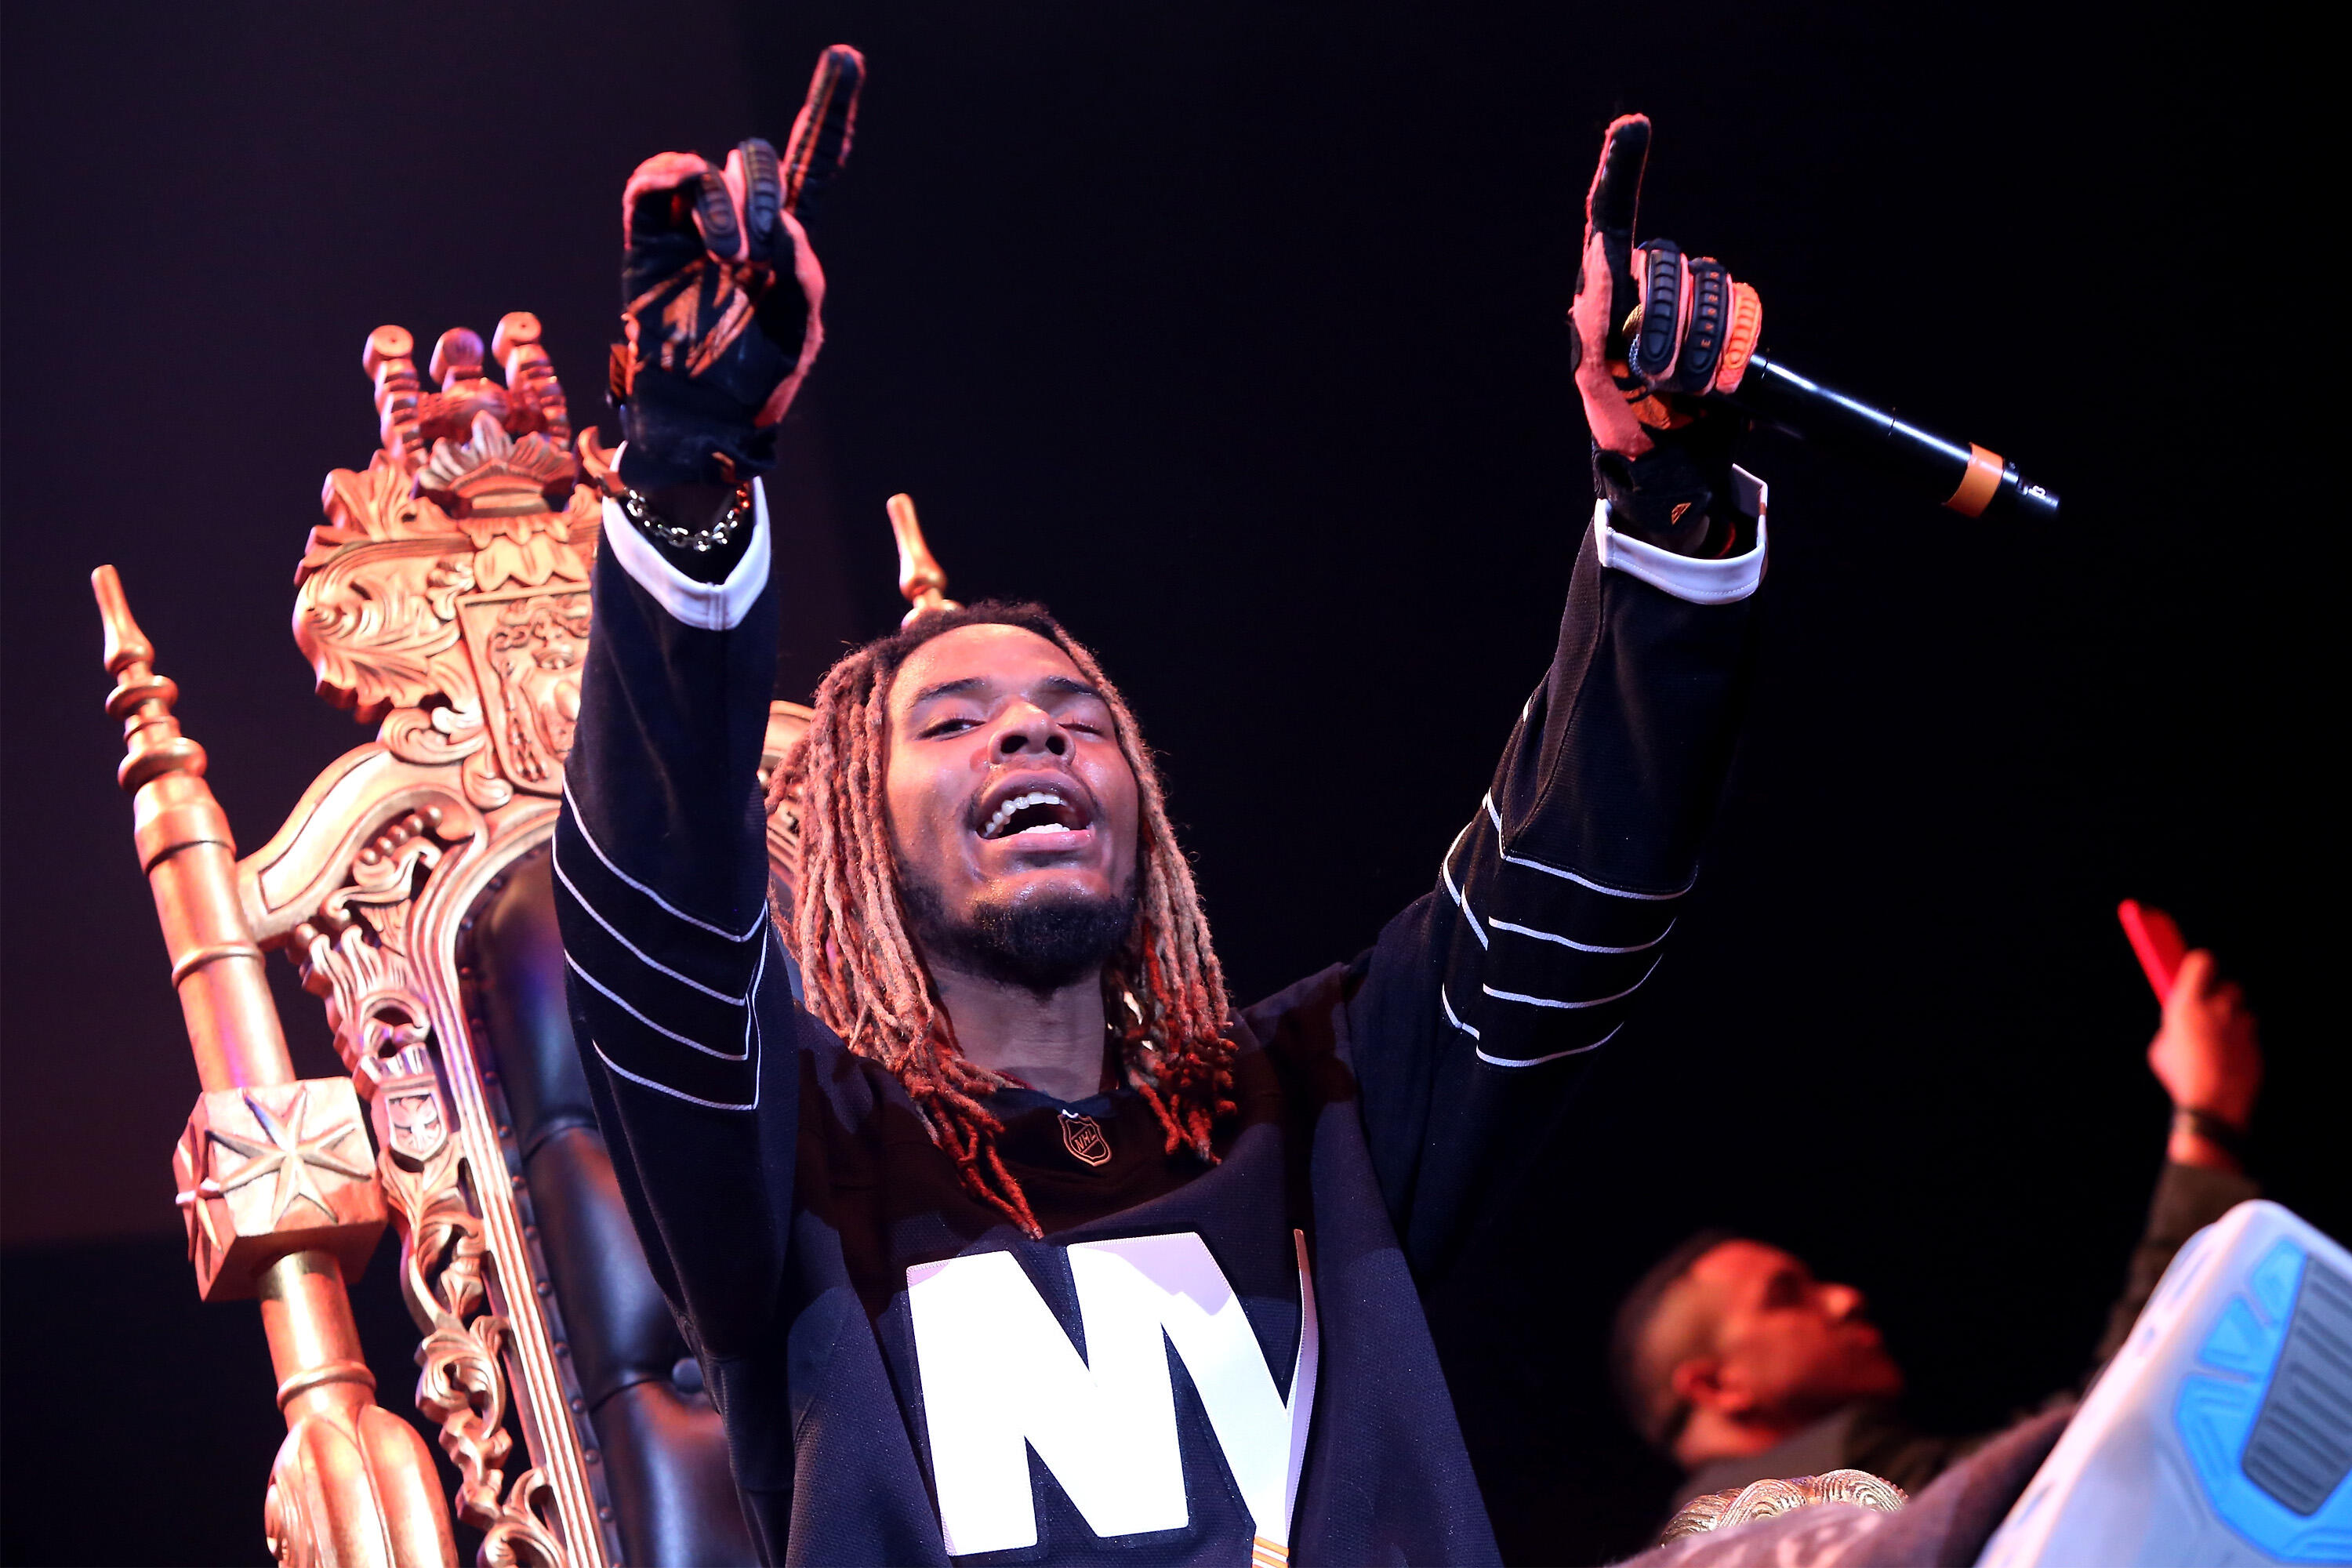 NEW YORK, NY - OCTOBER 22:  Rapper Fetty Wap performs onstage during 105.1s Powerhouse 2015 at the Barclays Center on October 22, 2015 in Brooklyn, NY.  (Photo by Bennett Raglin/Getty Images for Power 105.1's Powerhouse 2015)